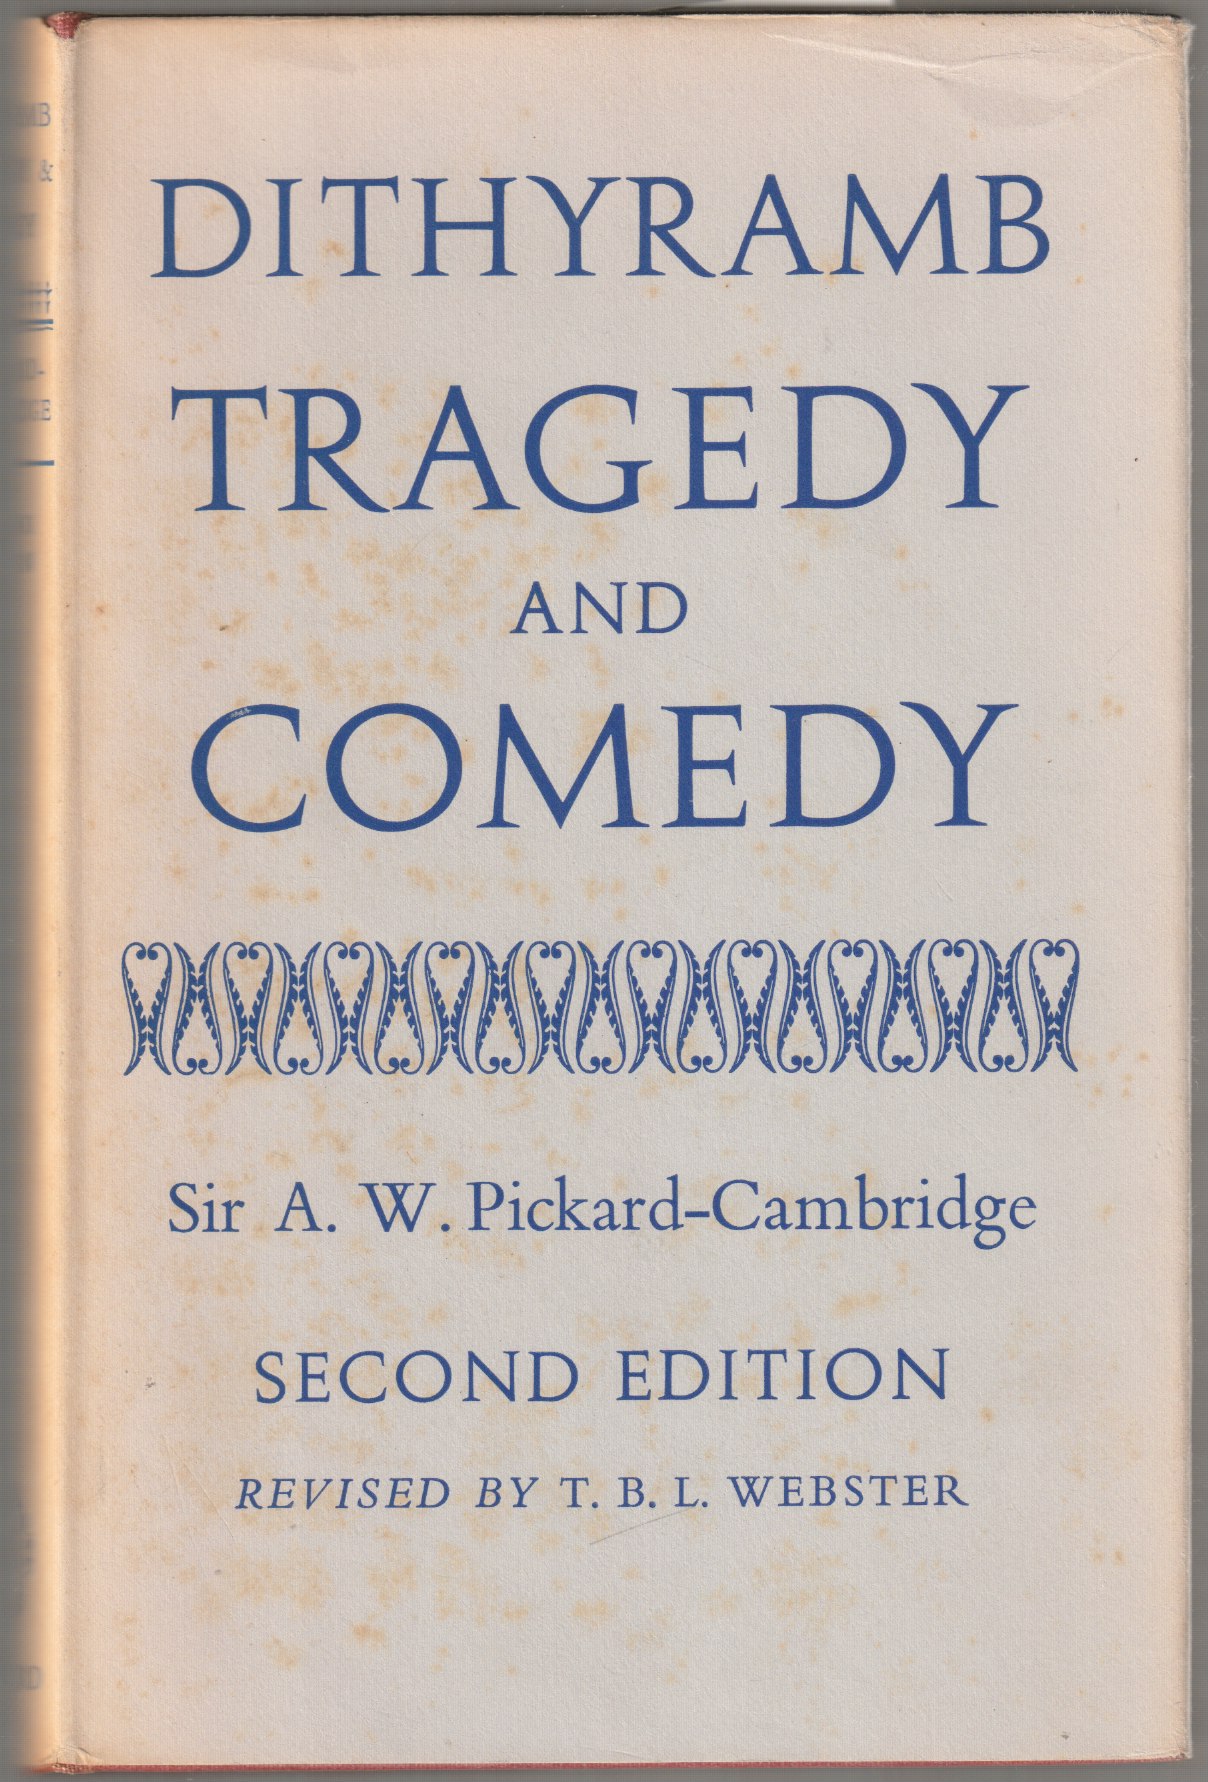 Dithyramb tragedy and comedy.